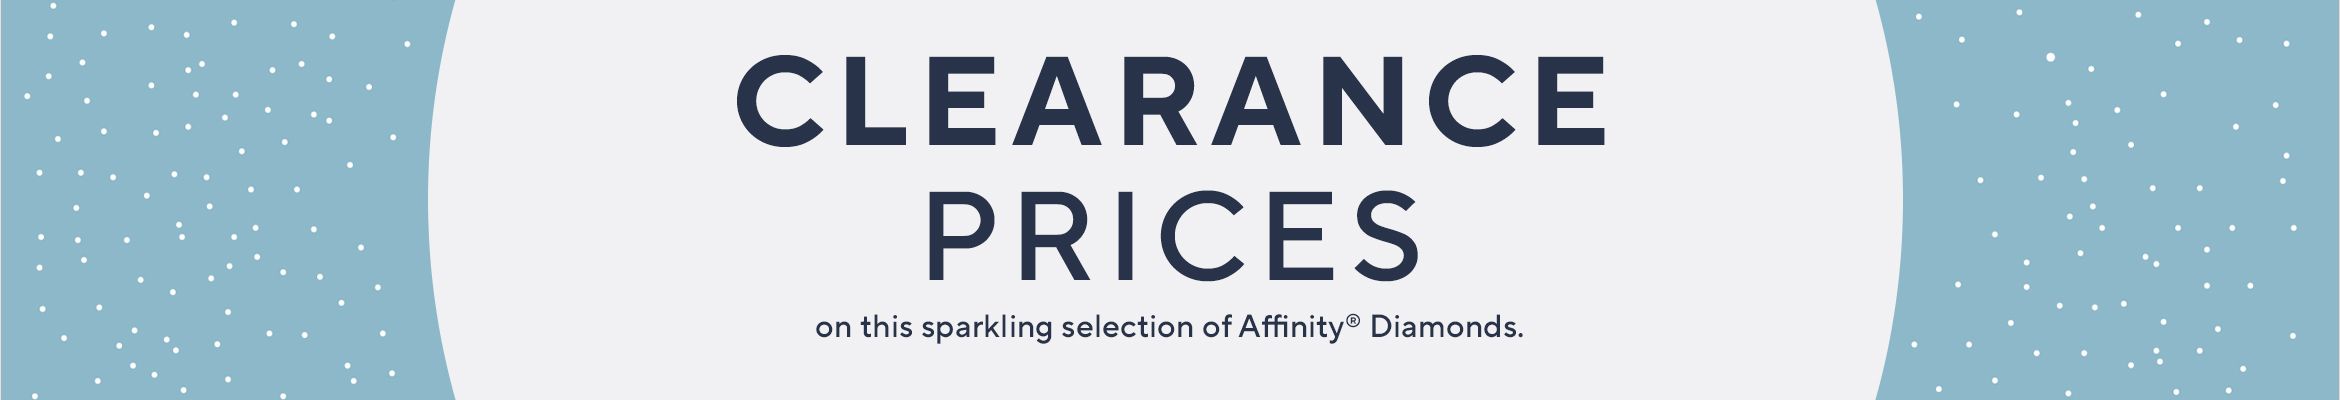 Clearance Prices on this sparkling selection of Affinity® Diamonds.